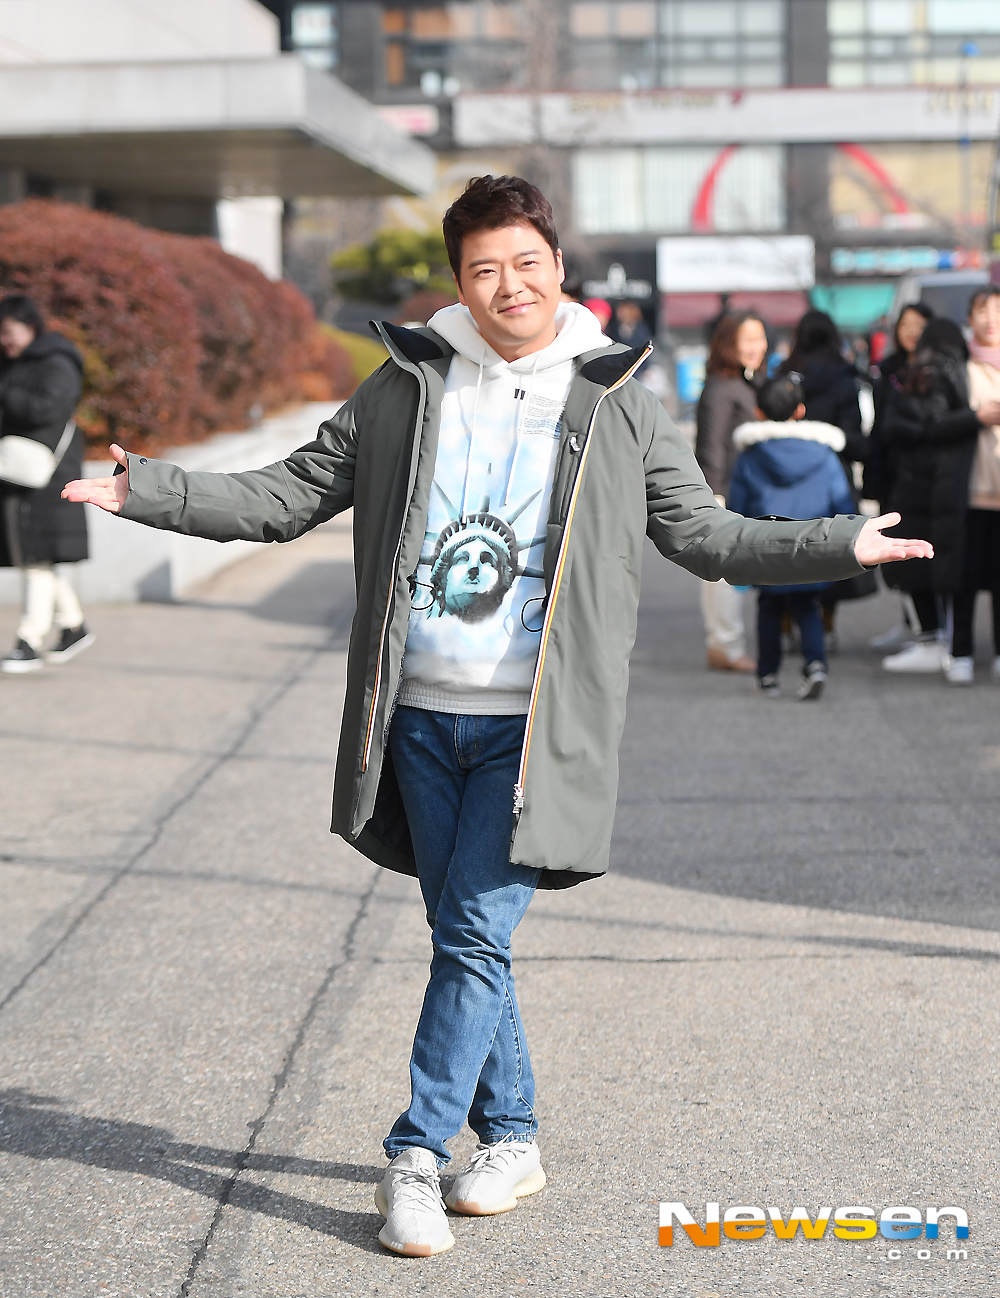 KBS 2TV Happy Together Season 4 recording was held at the KBS annex in Yeouido-dong, Yeongdeungpo-gu, Seoul on the afternoon of December 15.Jun Hyun-moo poses on the day.MC Yoo Jae-seok, Jun Hyun-moo, Cho Yoon-hee, and Jo Se-ho guest attended the drama Whats the Feng Sangs special recording, including Oh Ji-ho, Lee Si-young, Jeon Hye-bin and Kim Ji Young (child talent).expressiveness